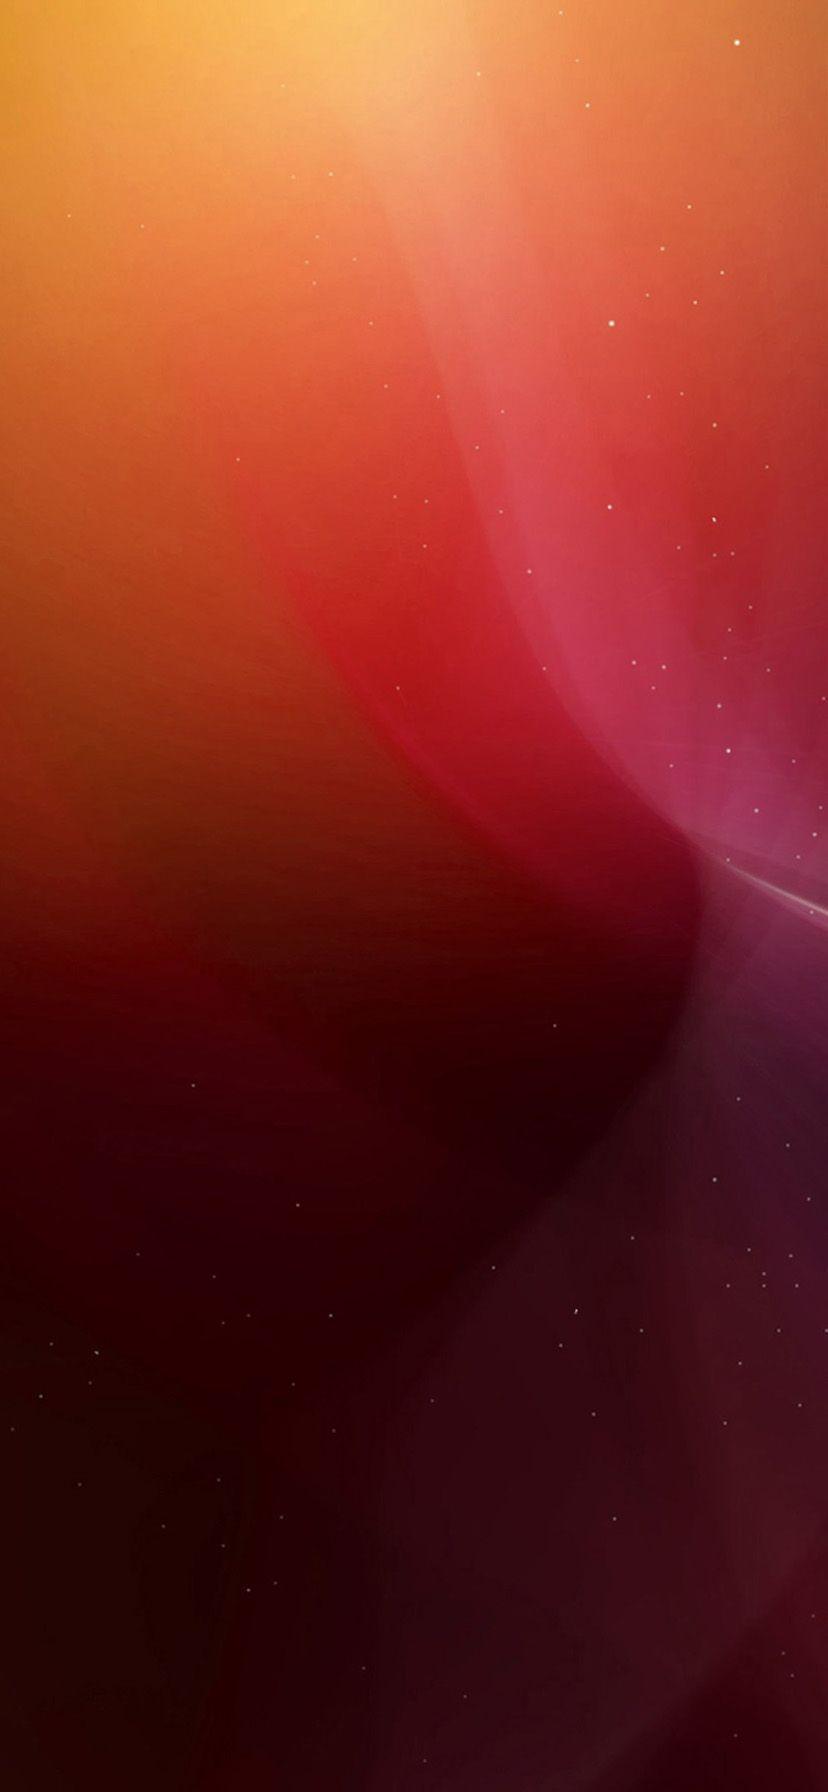 HD iPhone XR Wallpaper For vs09 aurora abstract art red orange star